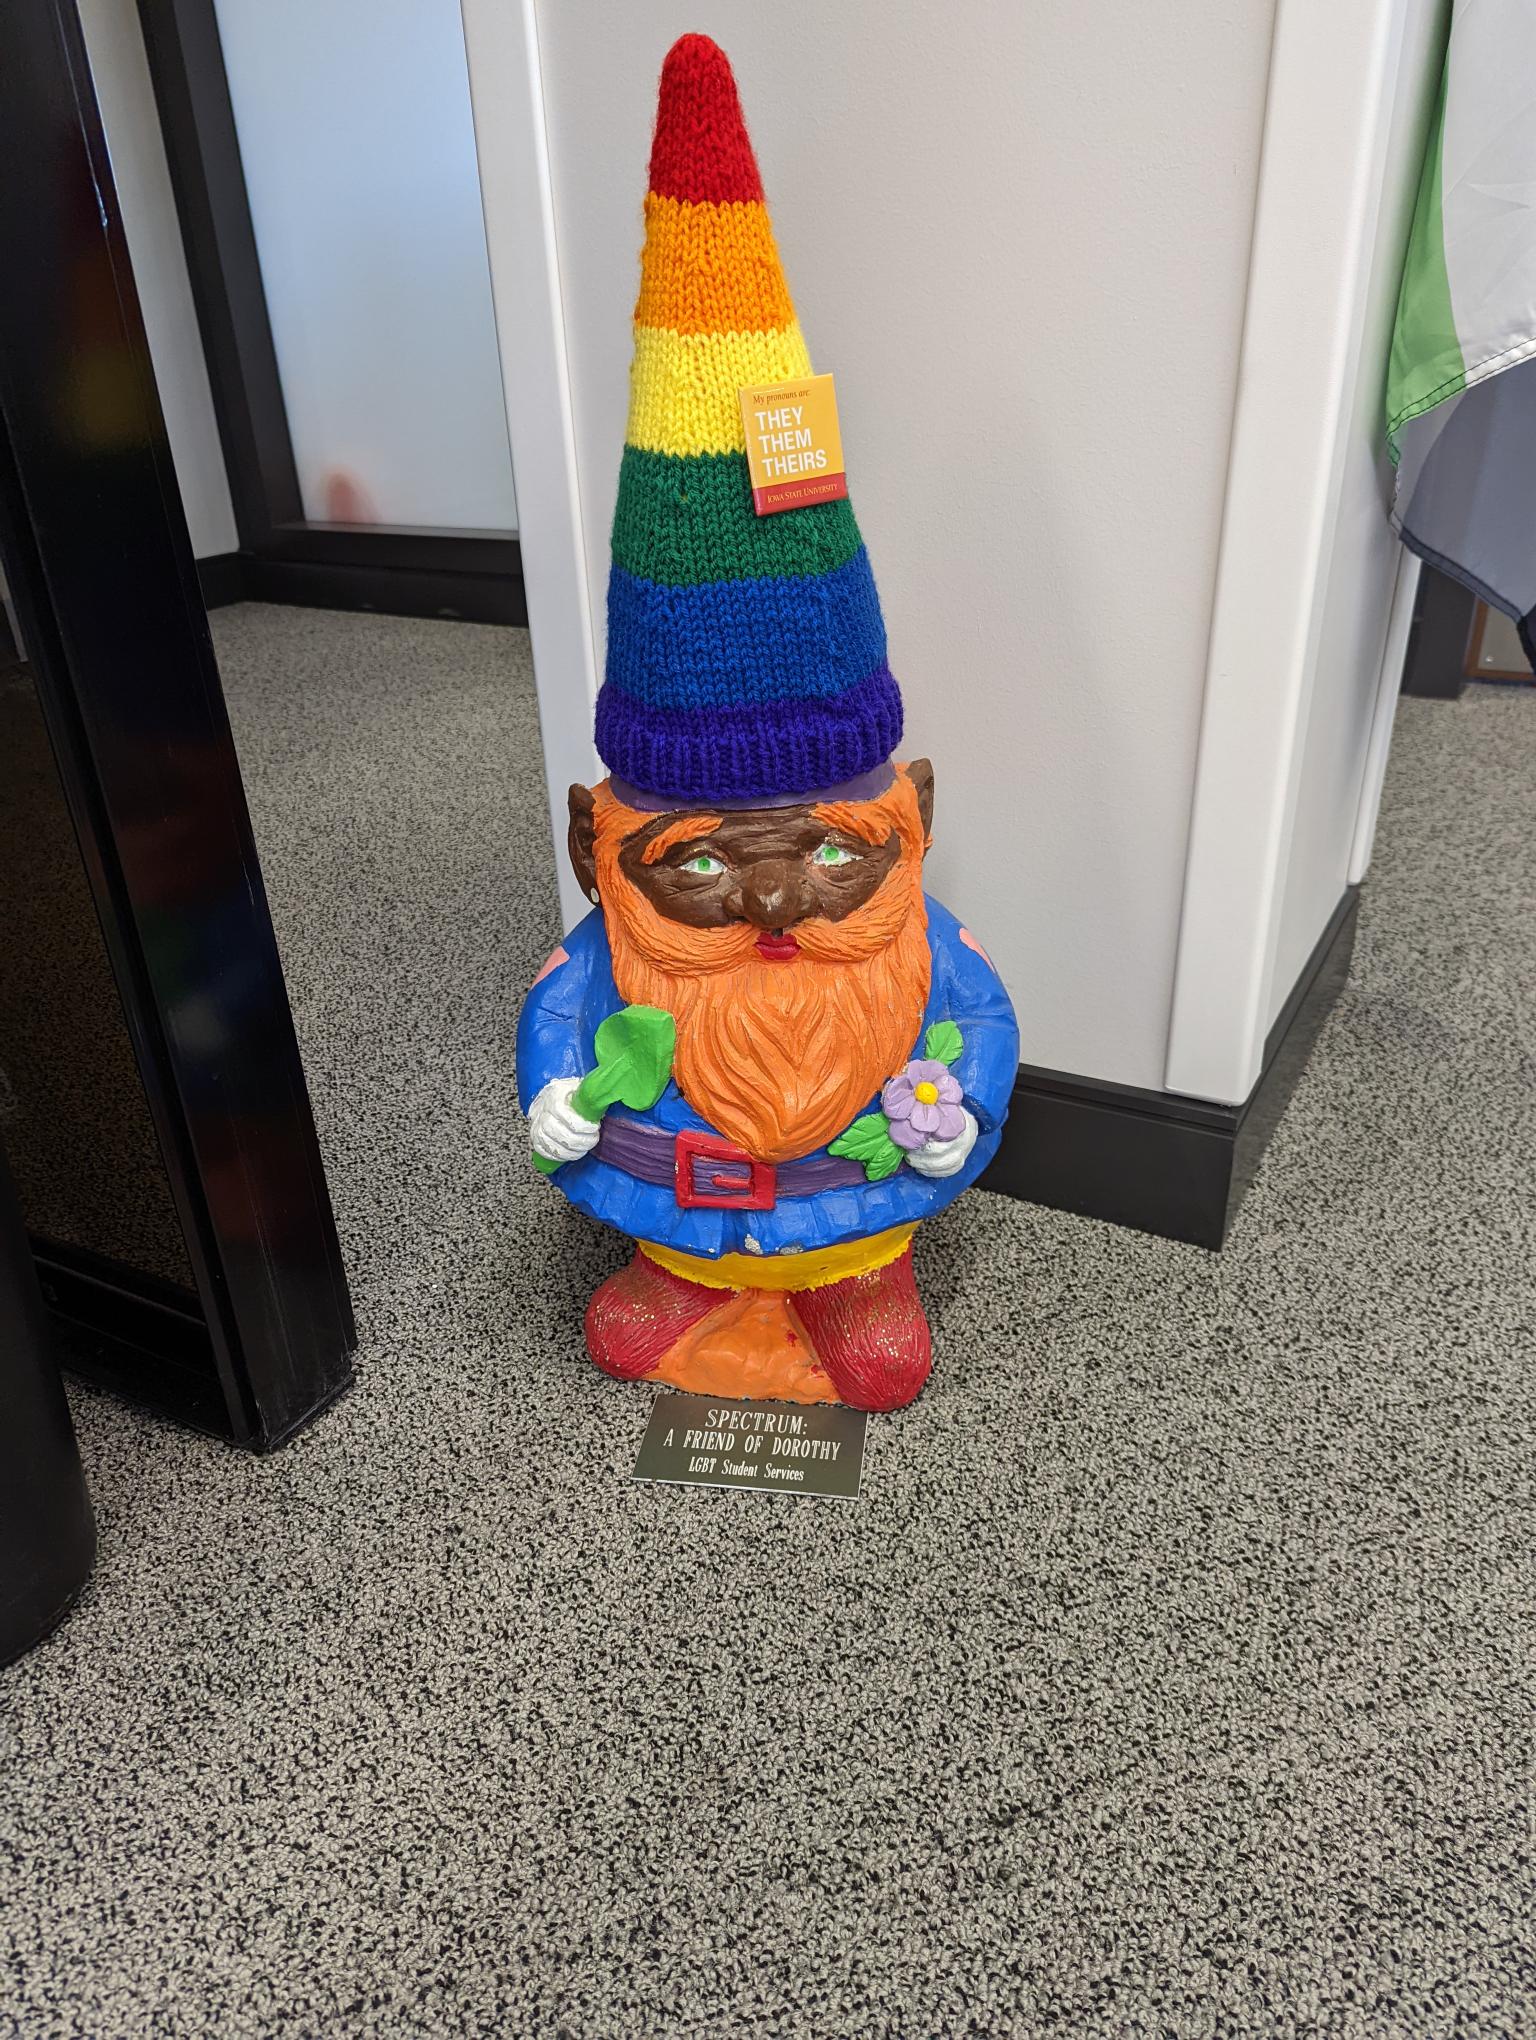 Spectrum the Gnome that lives at the center decorated with rainbow colored attire